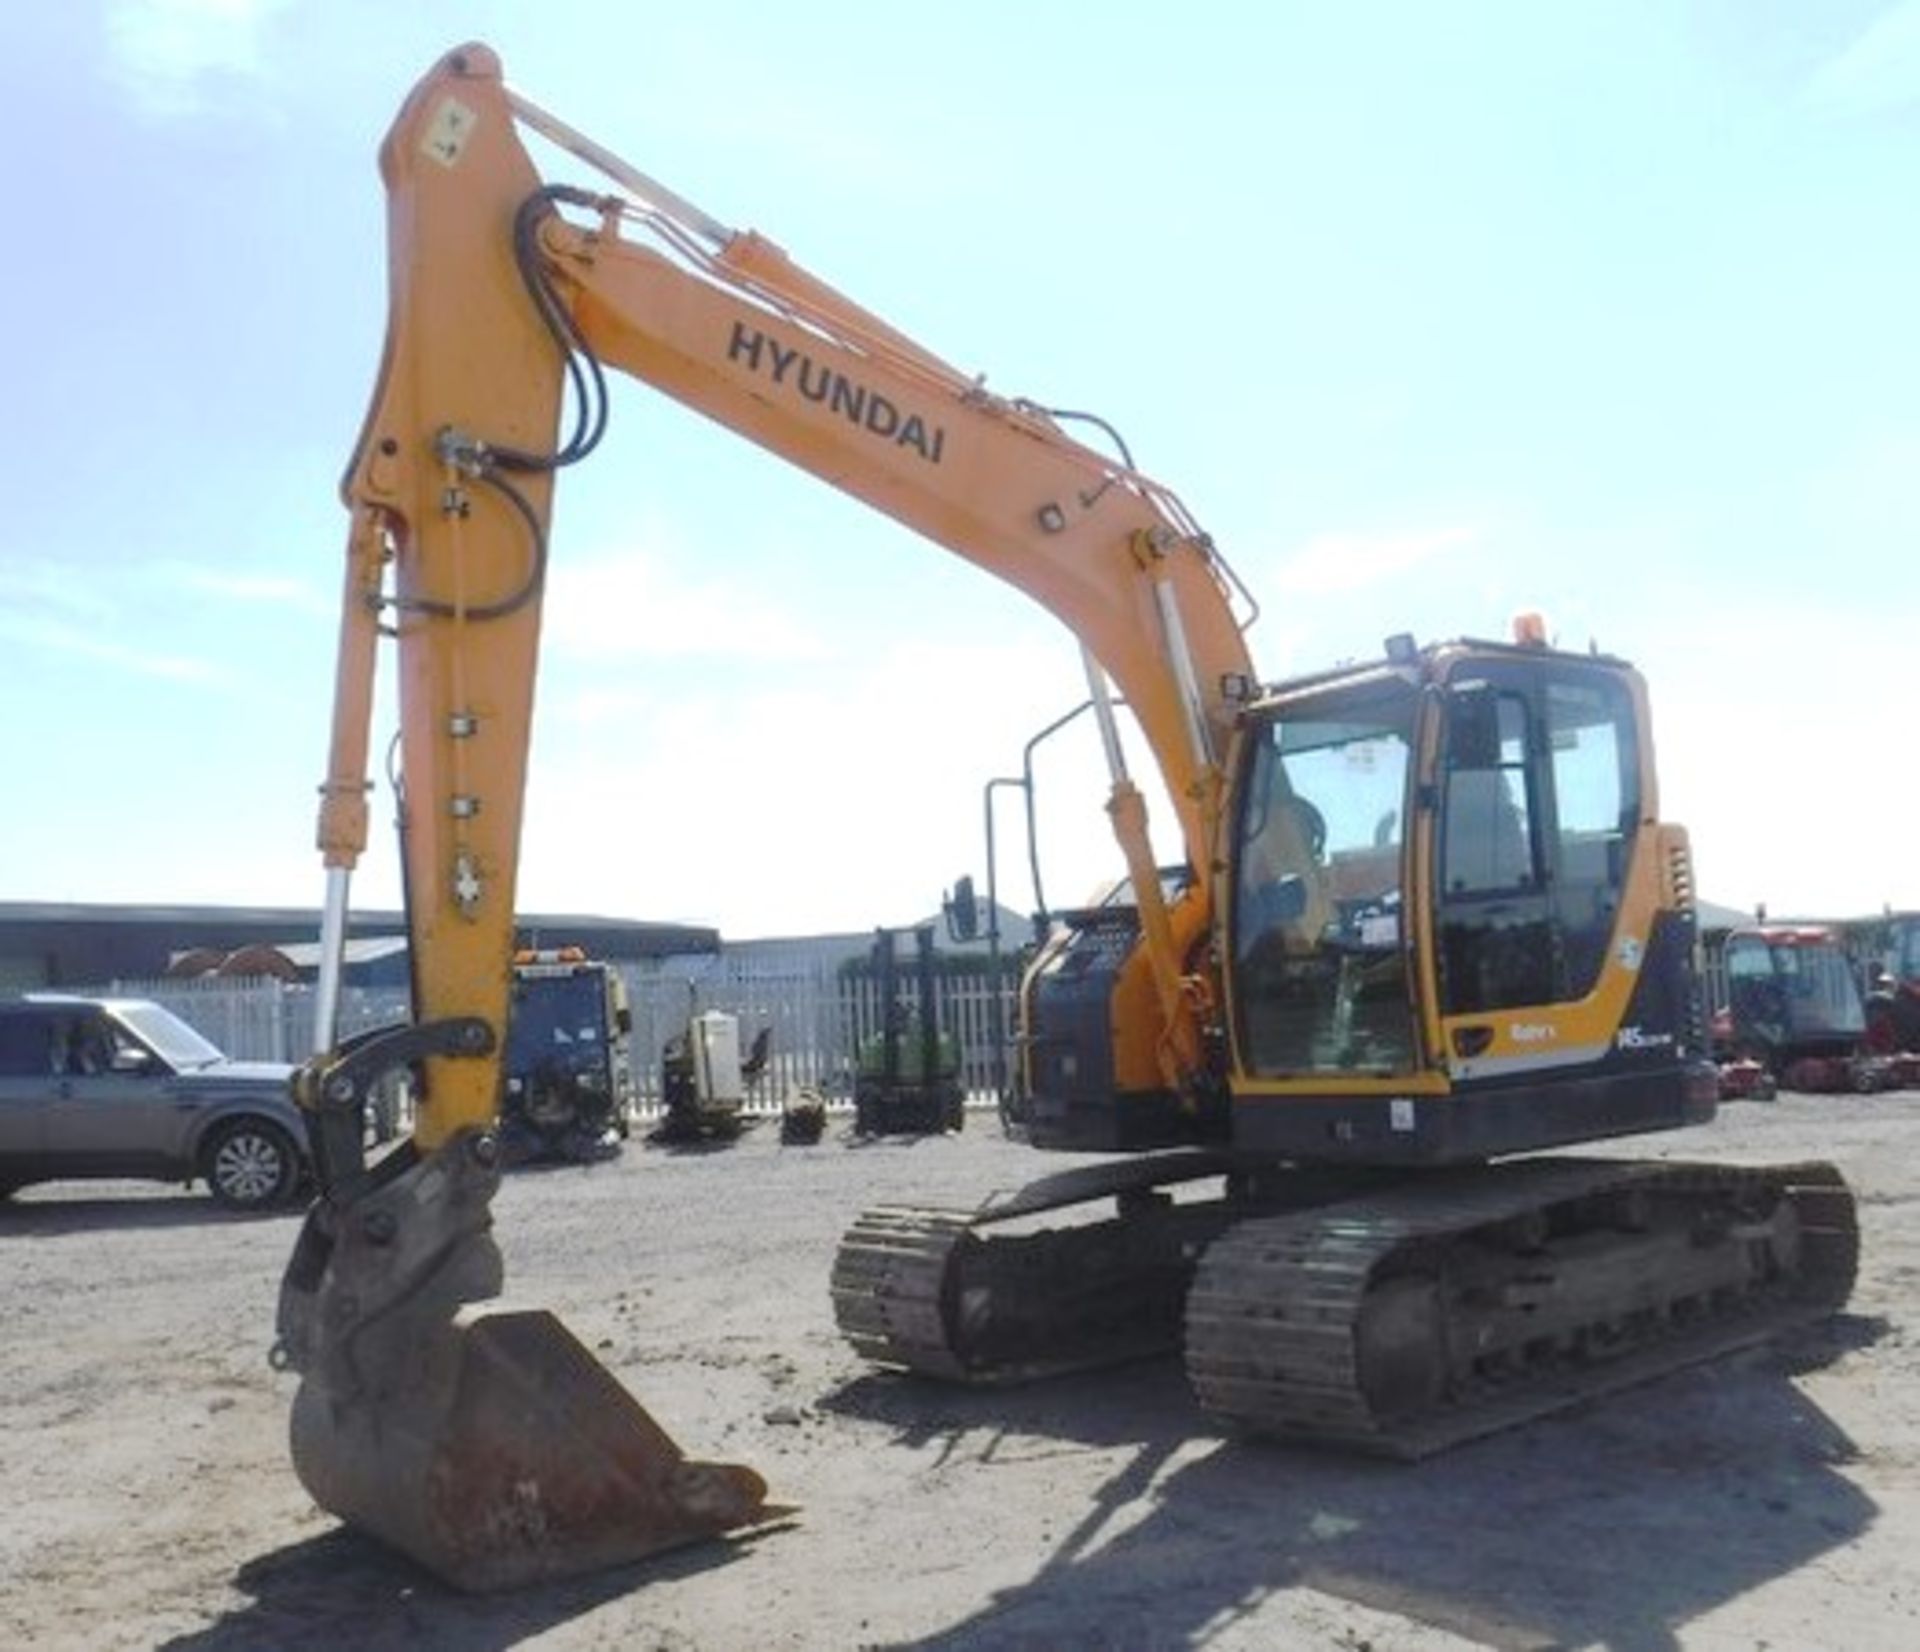 2014 HYUNDAI 145-9A excavator c/w 1 bucket. Short body version ideal for site work. s/n 068. 4263hr - Image 31 of 32